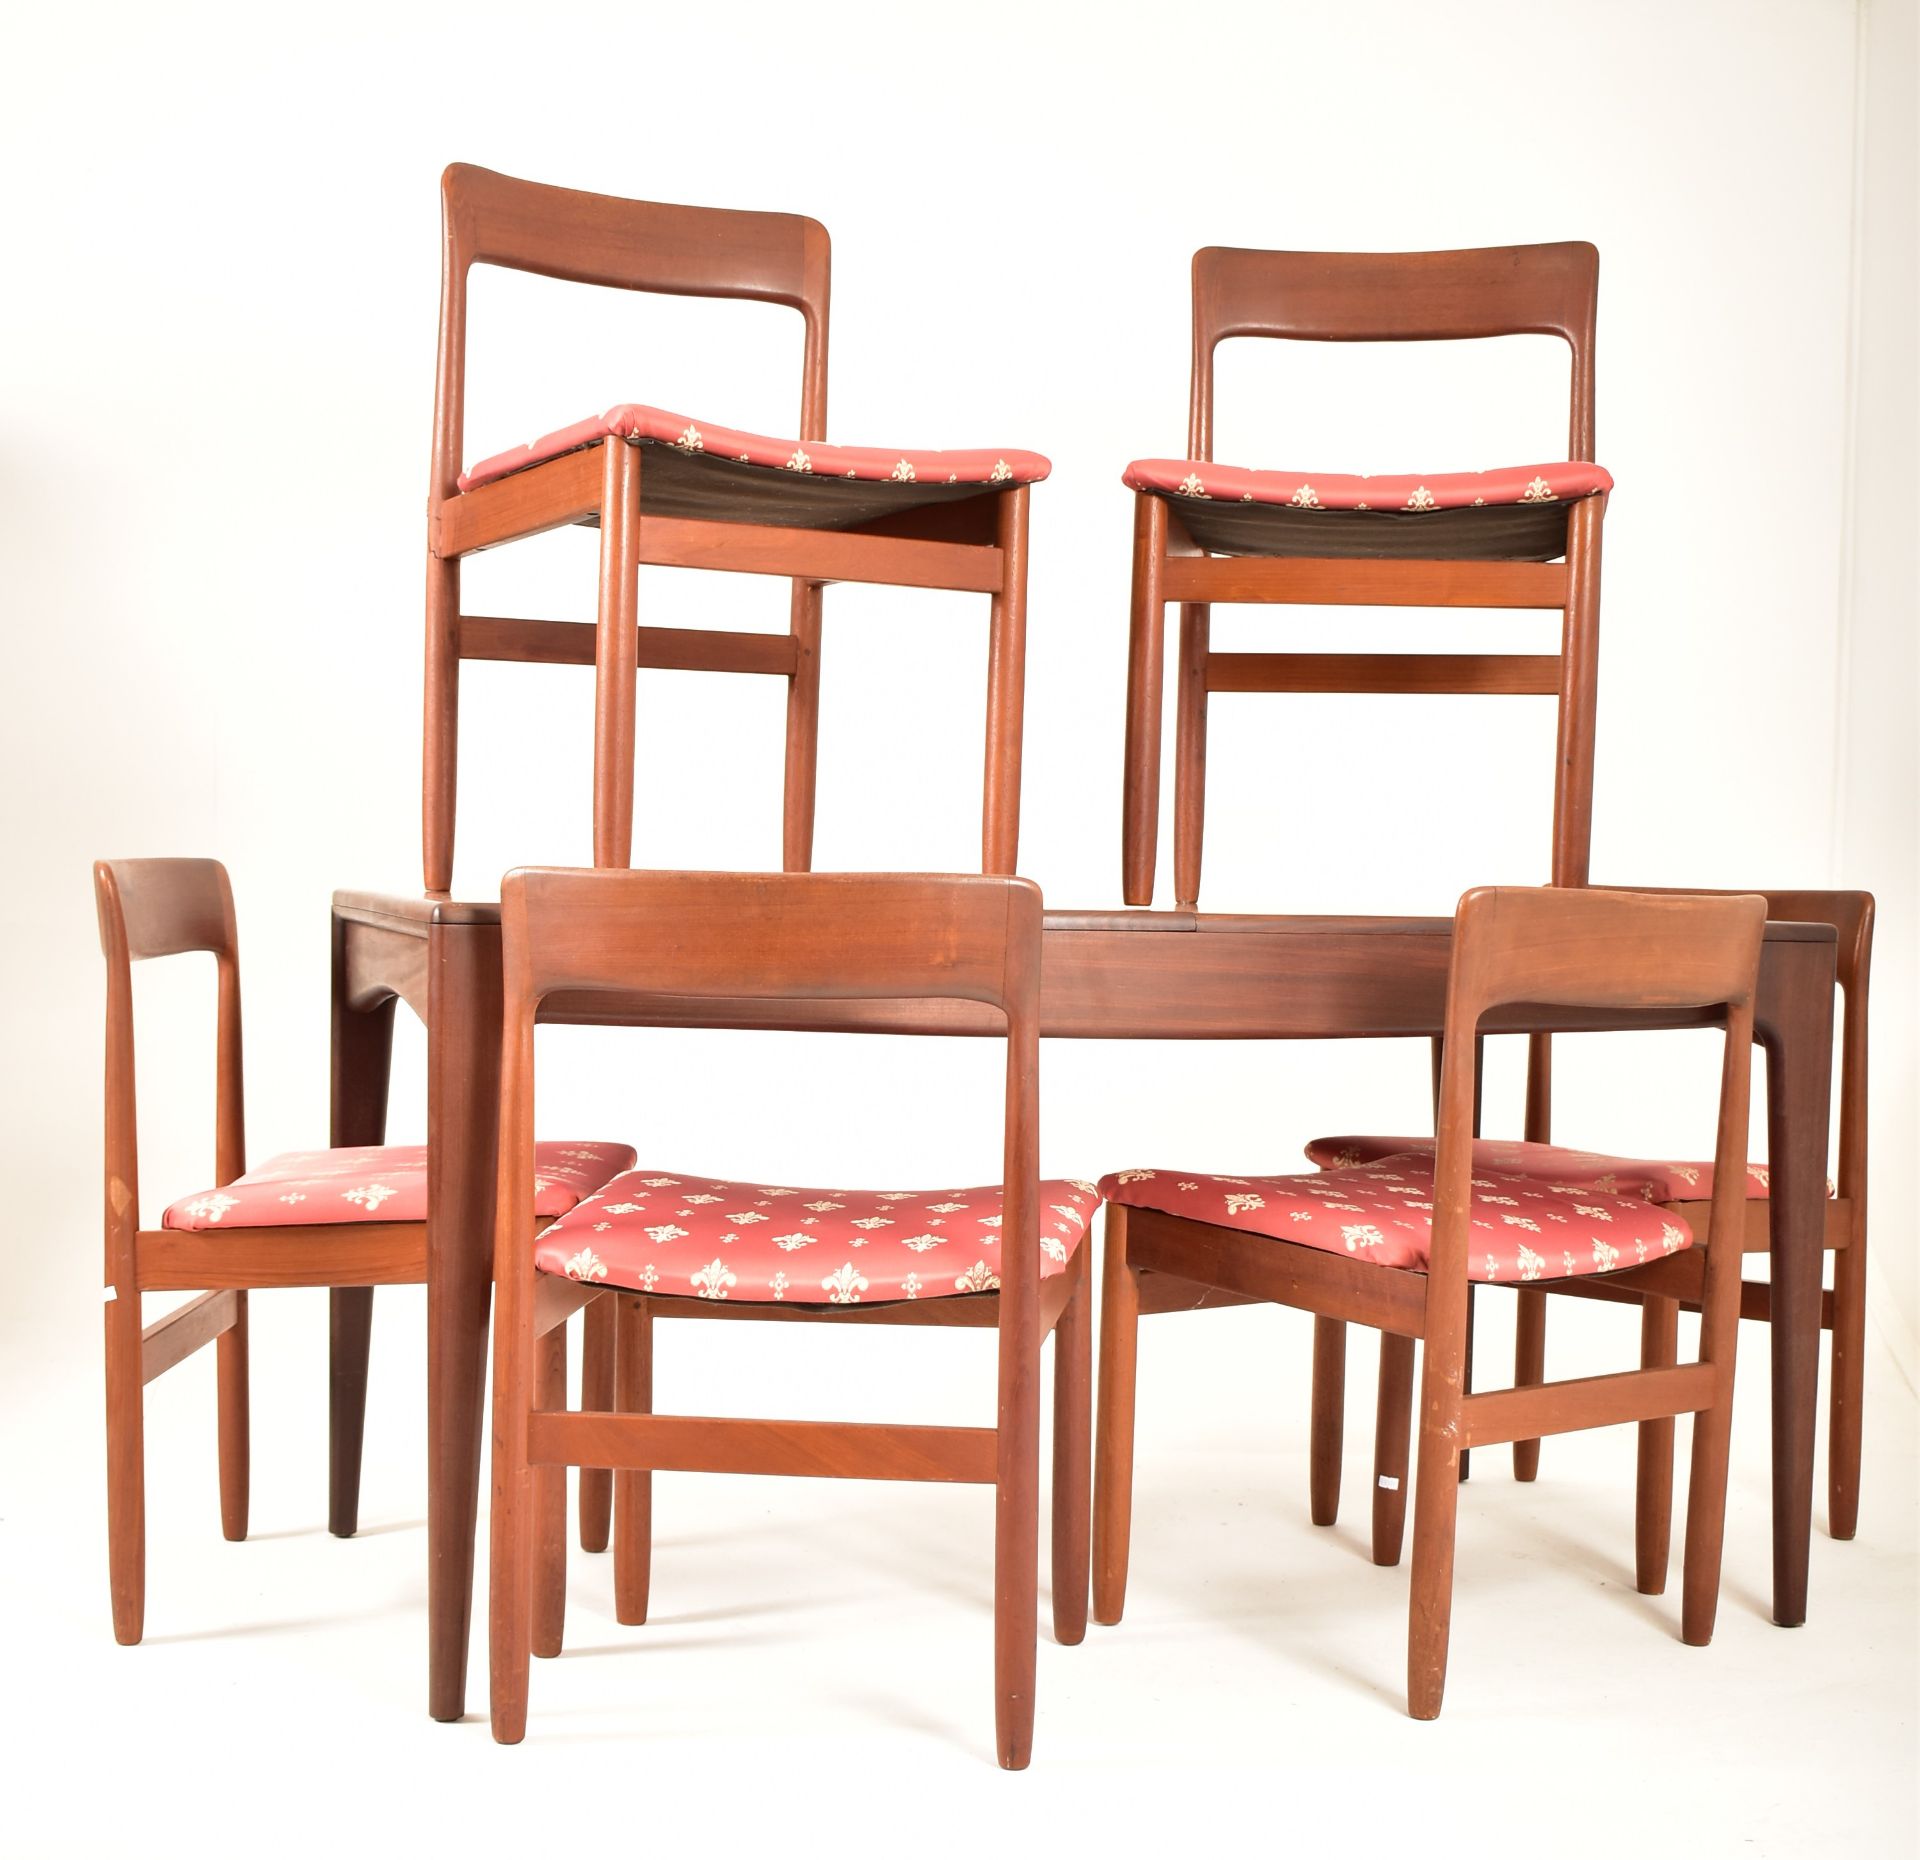 YOUNGERS - MID CENTURY 1960S TEAK DINING TABLE AND CHAIRS